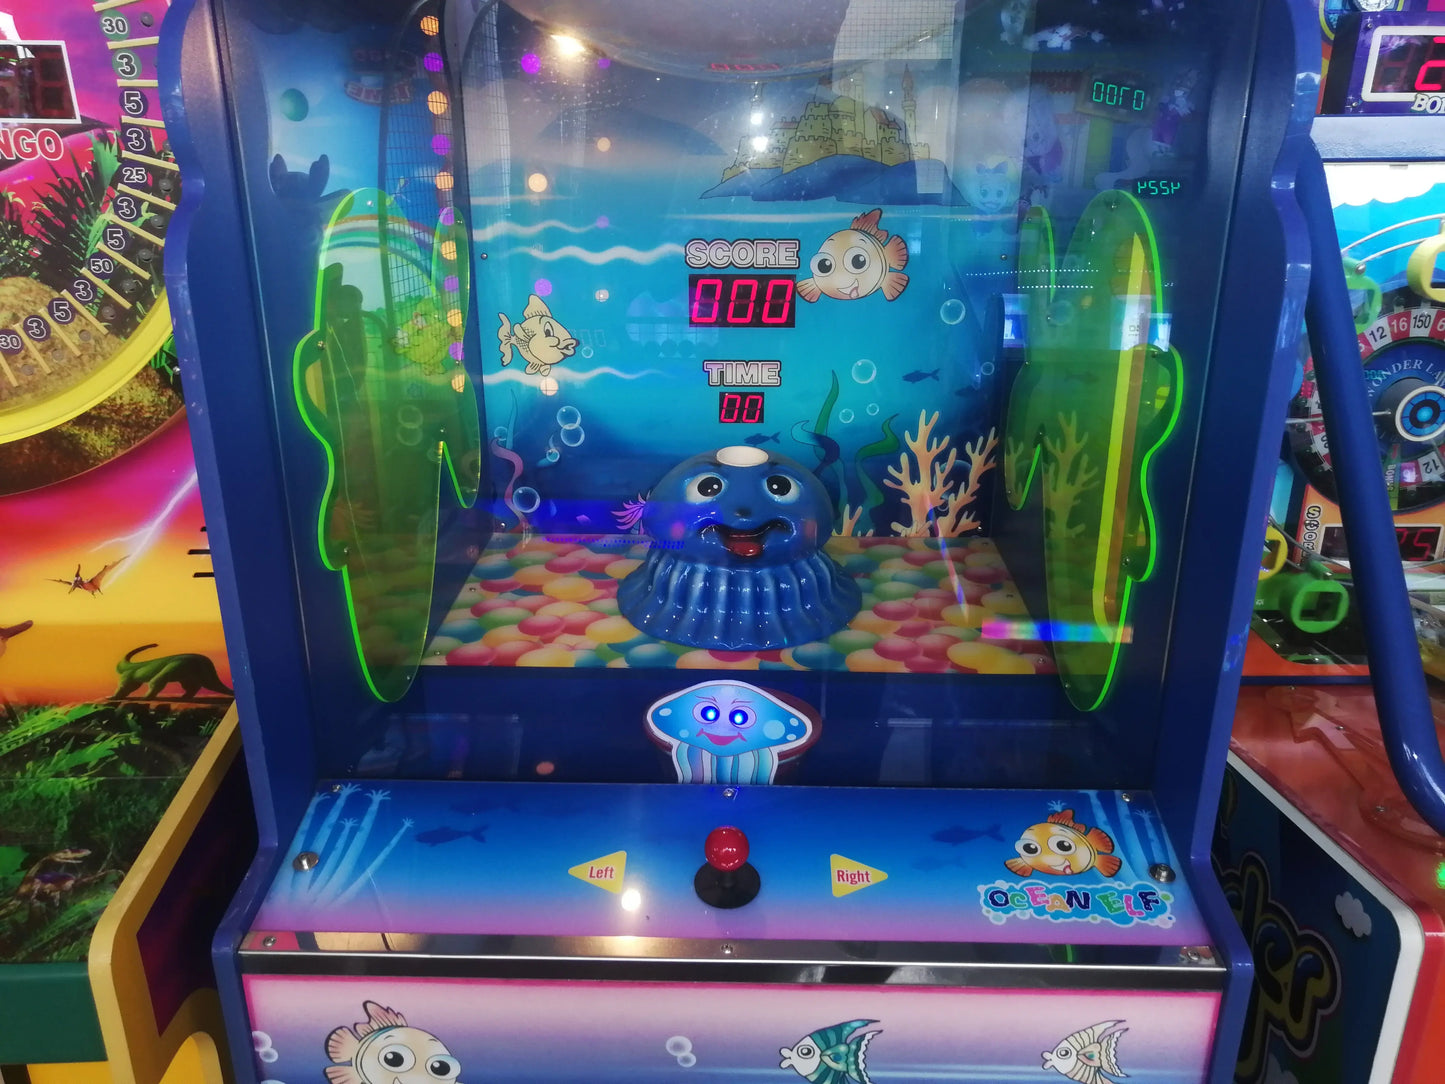 Ocean-Elf-Lottery-Redemption-game-machine-Amusement-Coin-Operated-Ticket-Redemption-Electronic-games-Tomy-Arcade